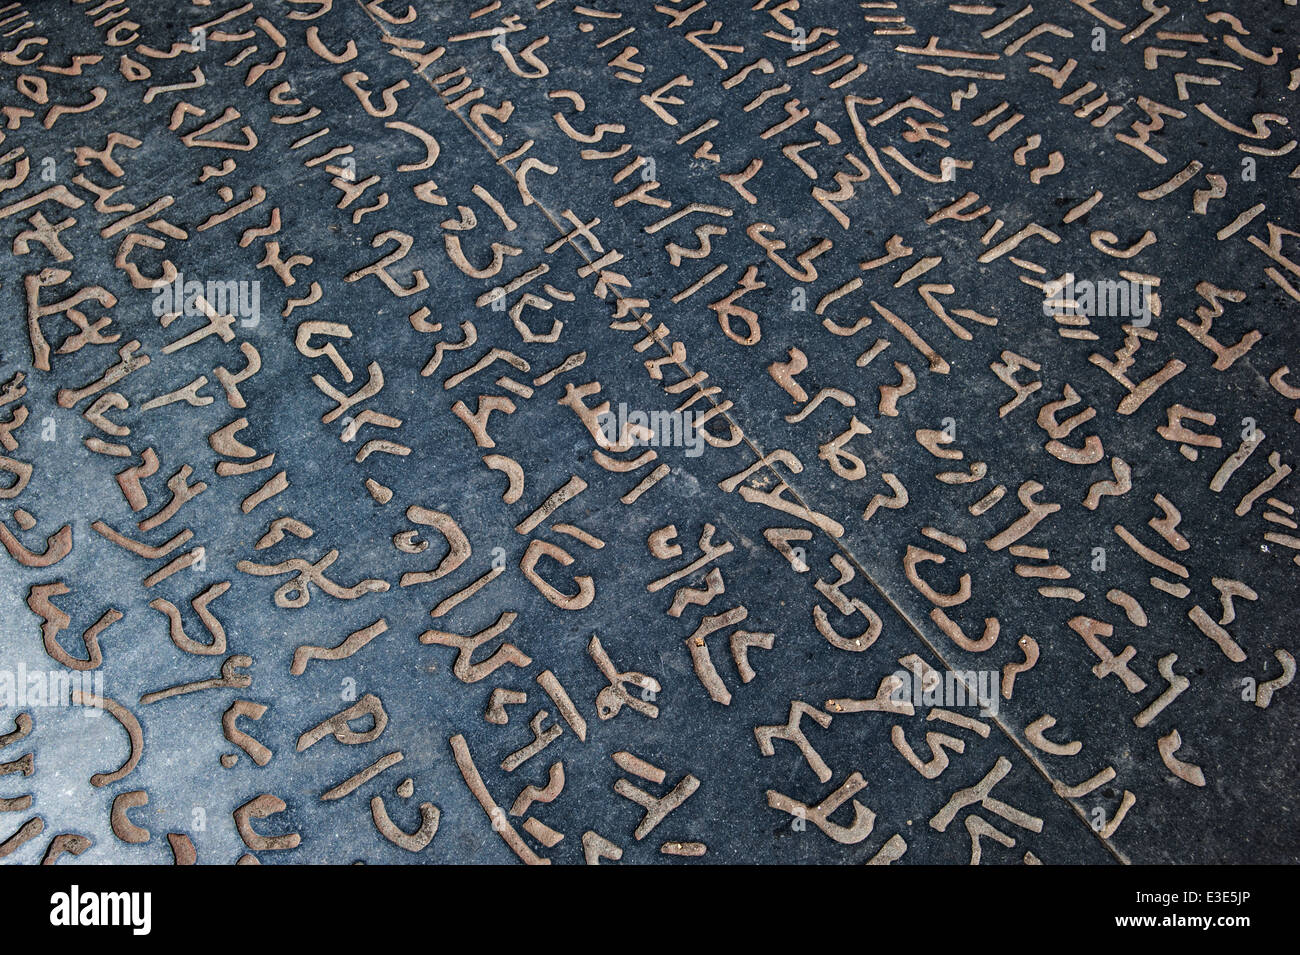 Replica of the Rosetta Stone that allowed Jean-François Champollion to decipher the Egyptian hieroglyphs, Figeac, Lot, France Stock Photo